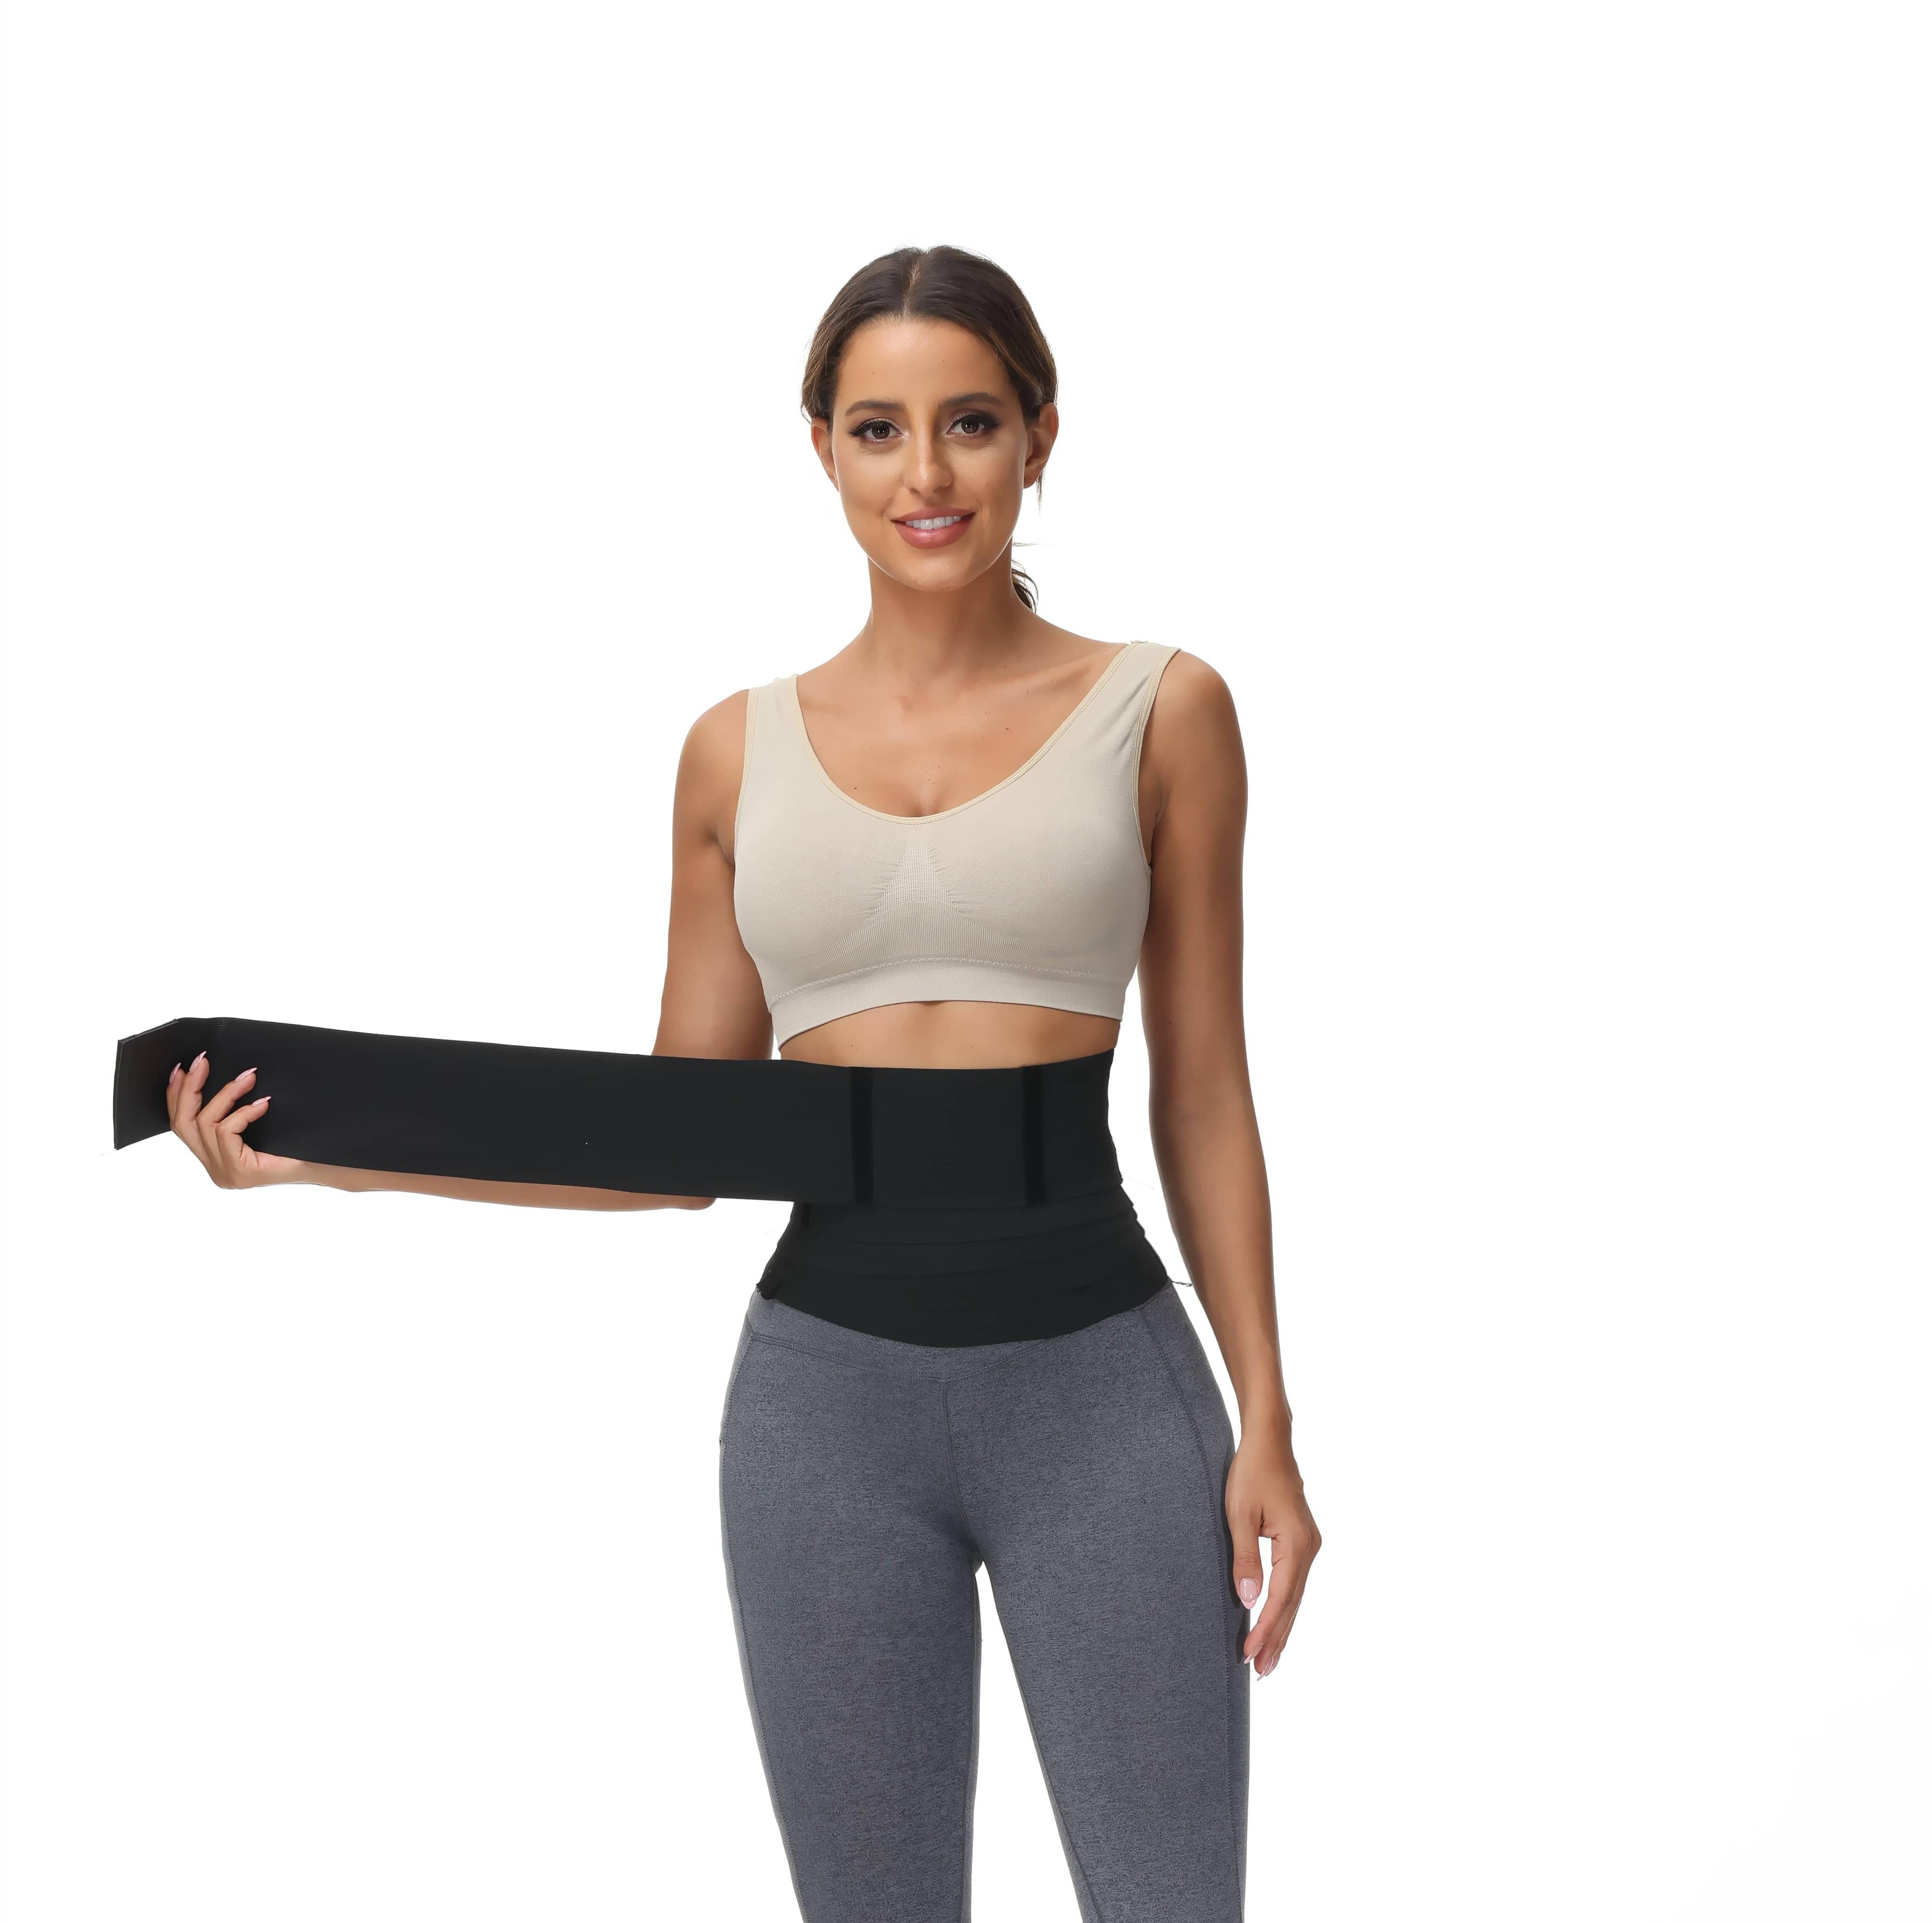 Snatch Me Up Bandage Wrap with Loop Waist Trainer for Women Stomach Wraps  Weight Loss Waist Trimmer Belt Corset Tummy Shapewear Slimming Body Shaper  – the best products in the Joom Geek